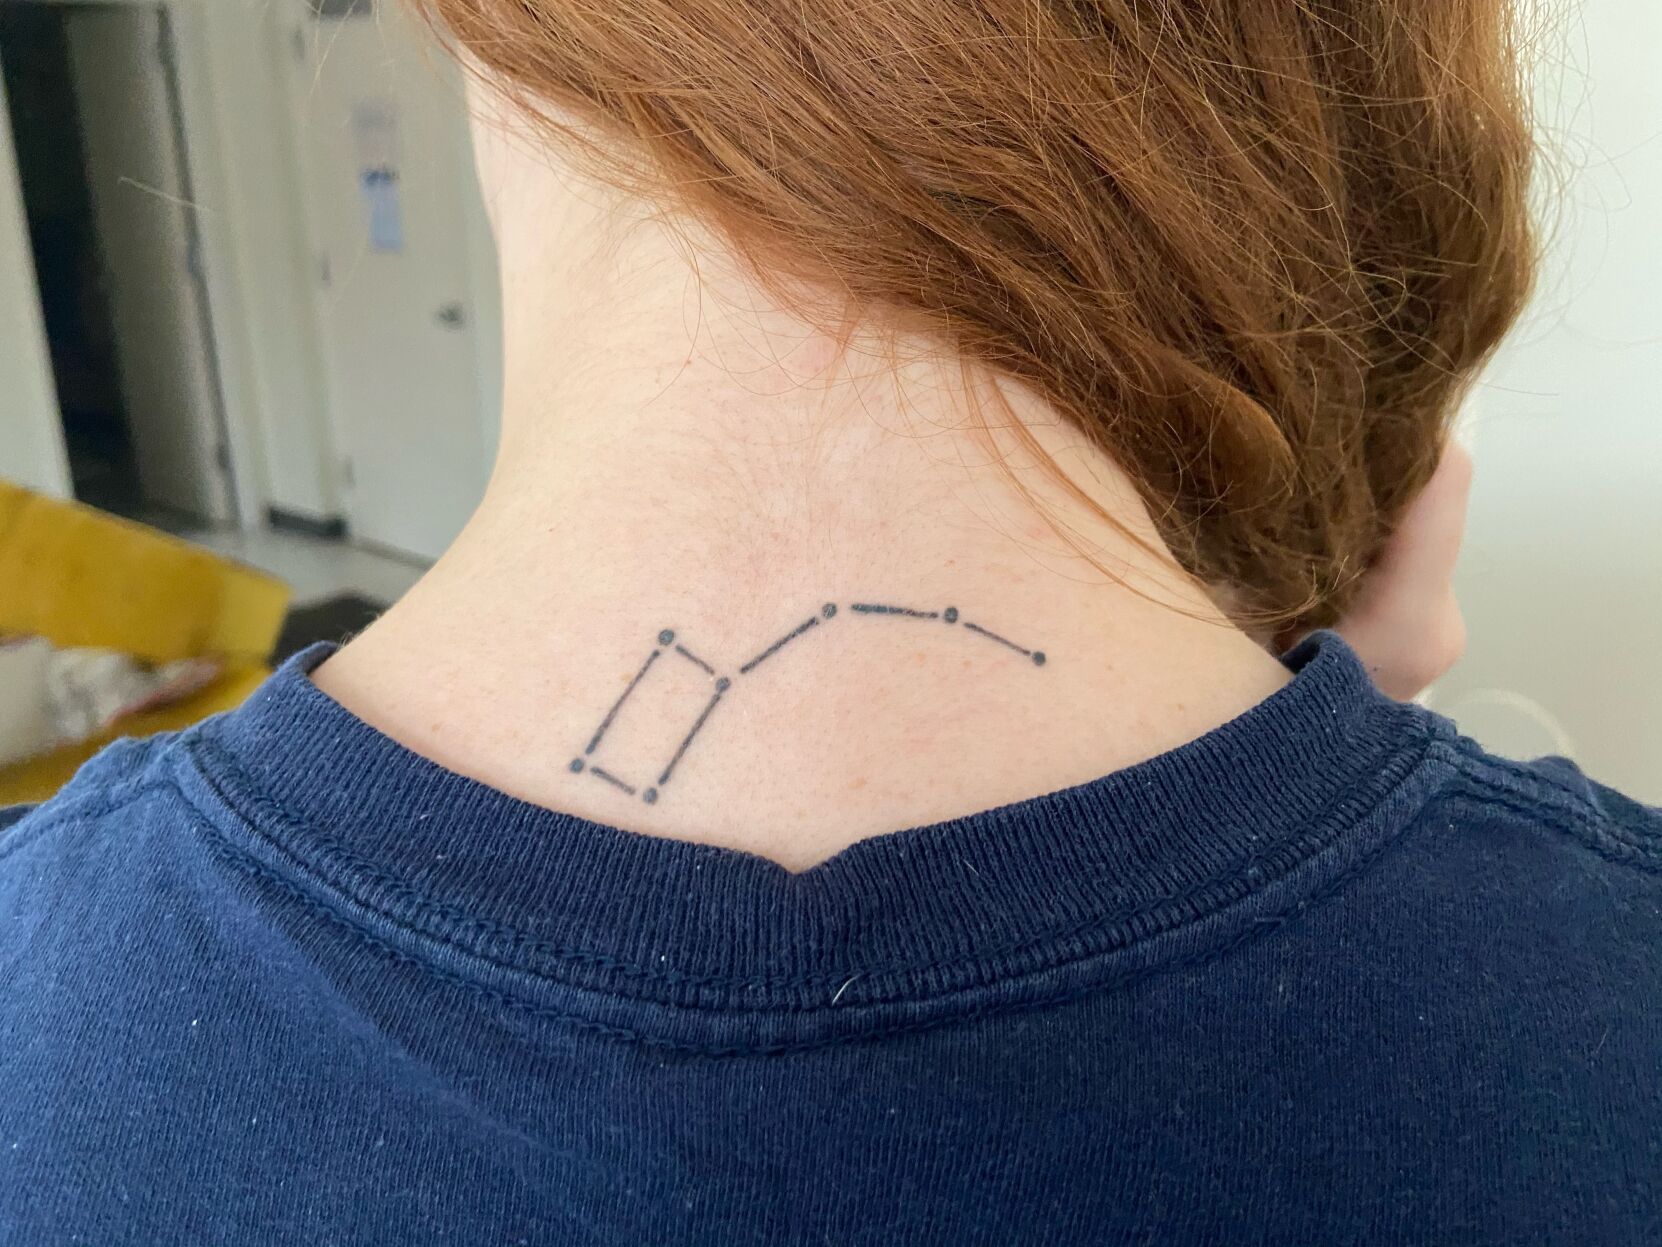 Big Dipper constellation tattoo on the upper back